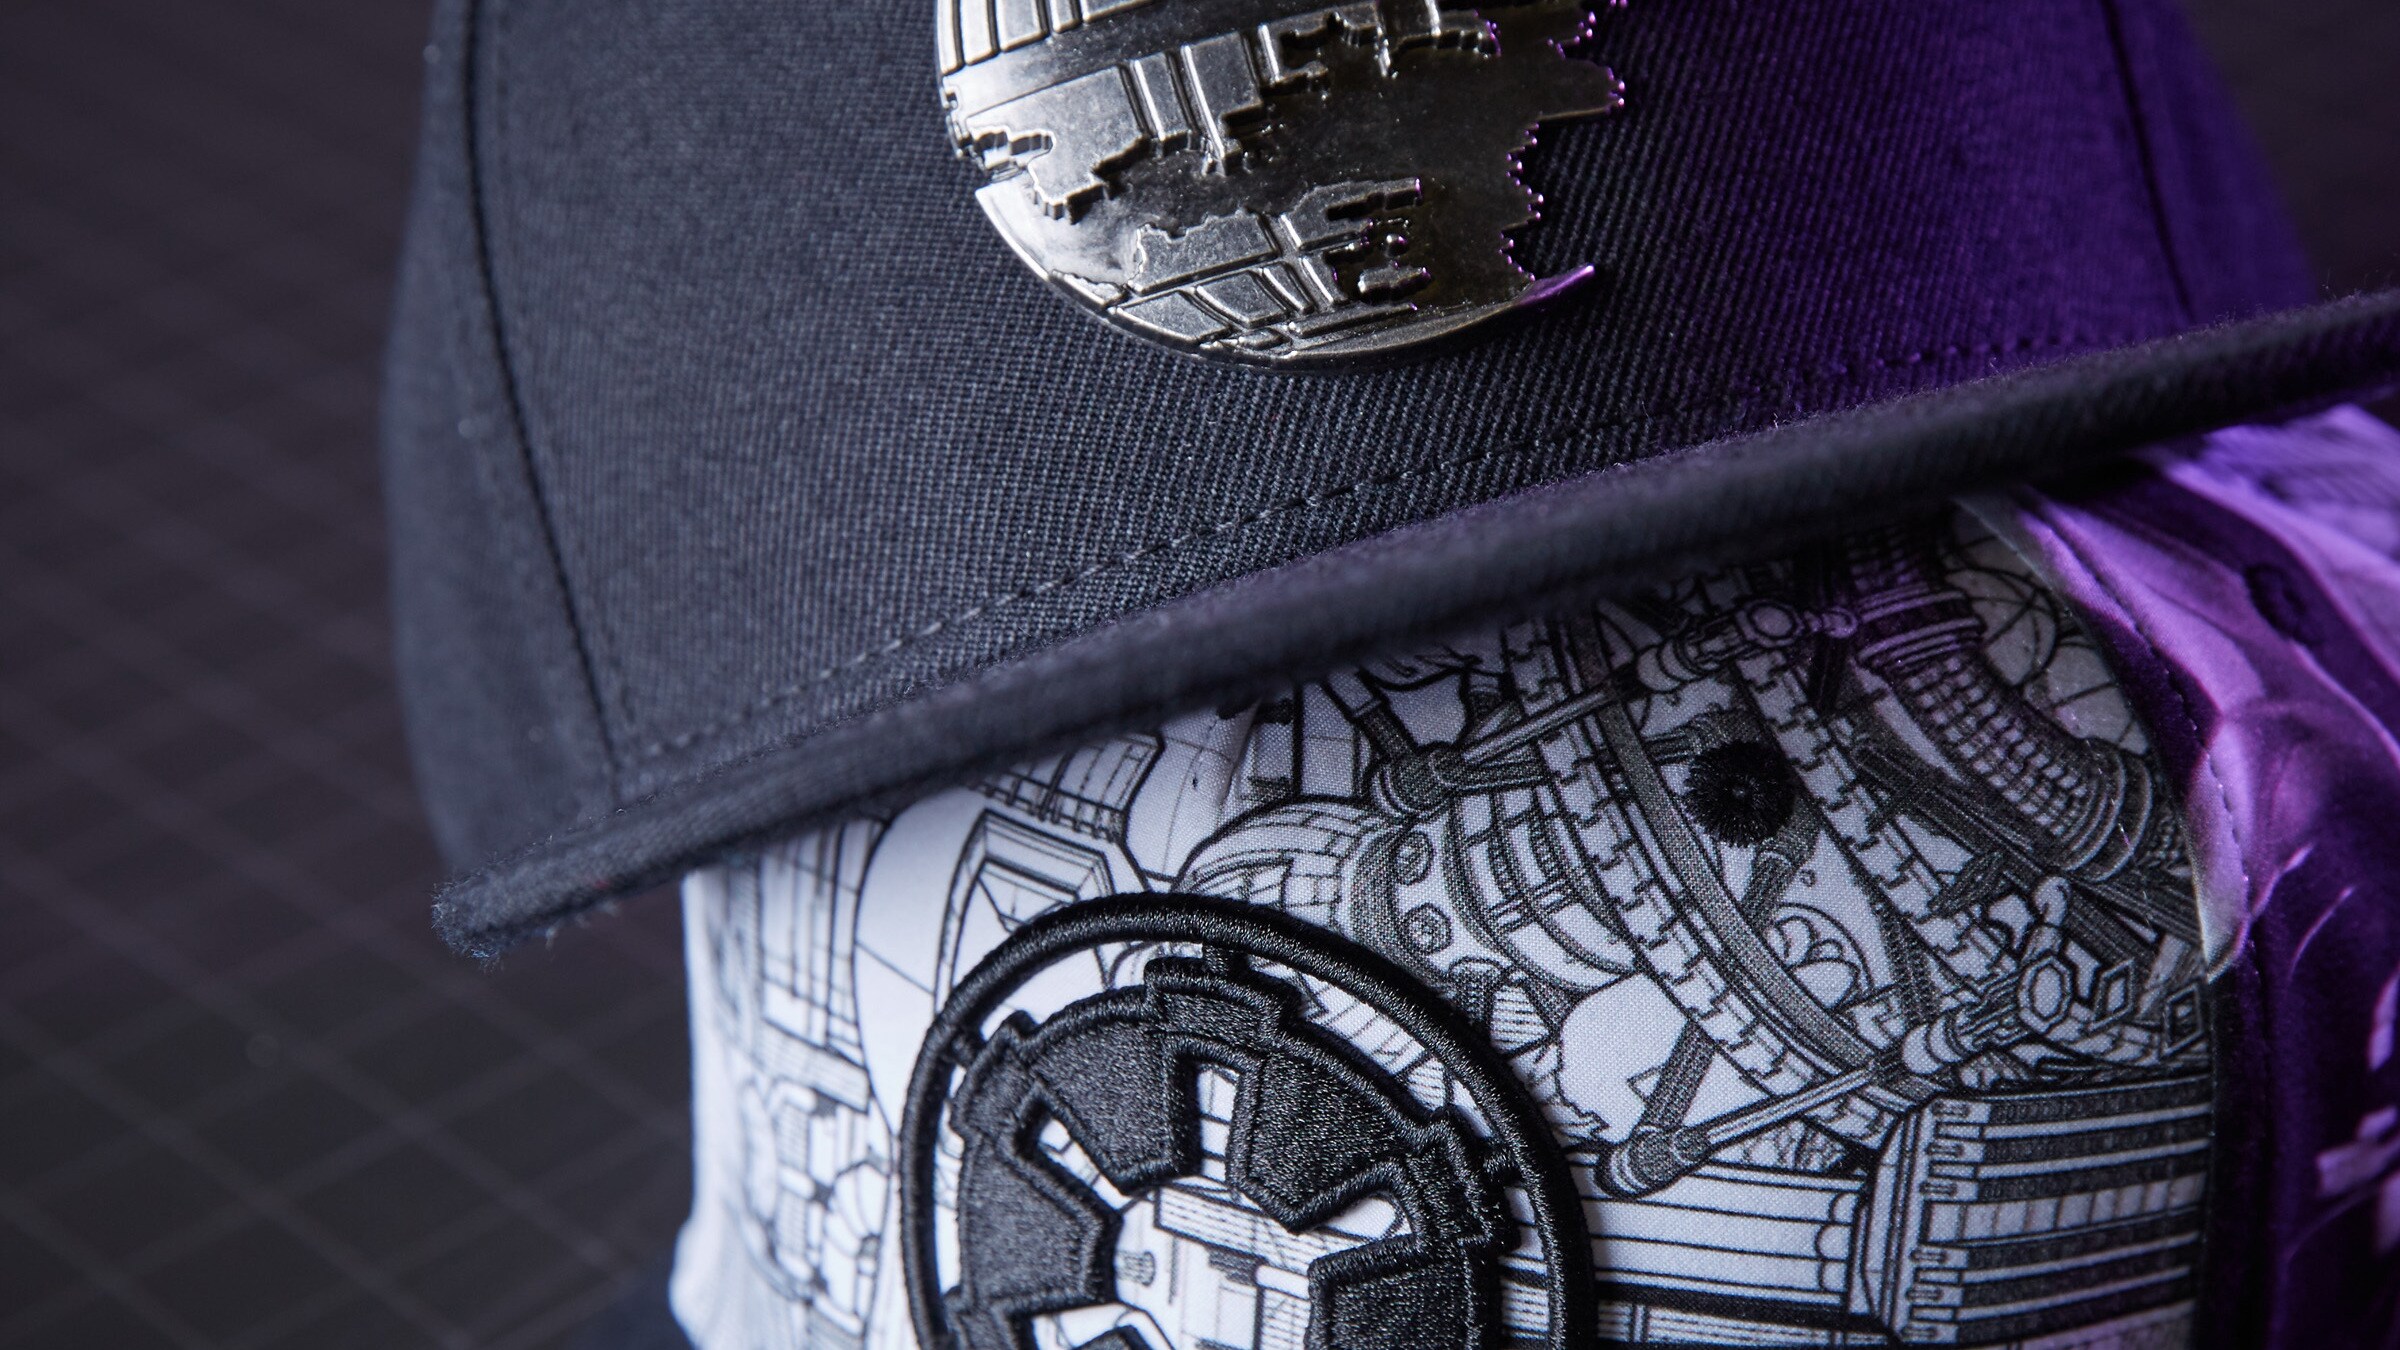 Hats decorated with Death Star and Imperial logo art.